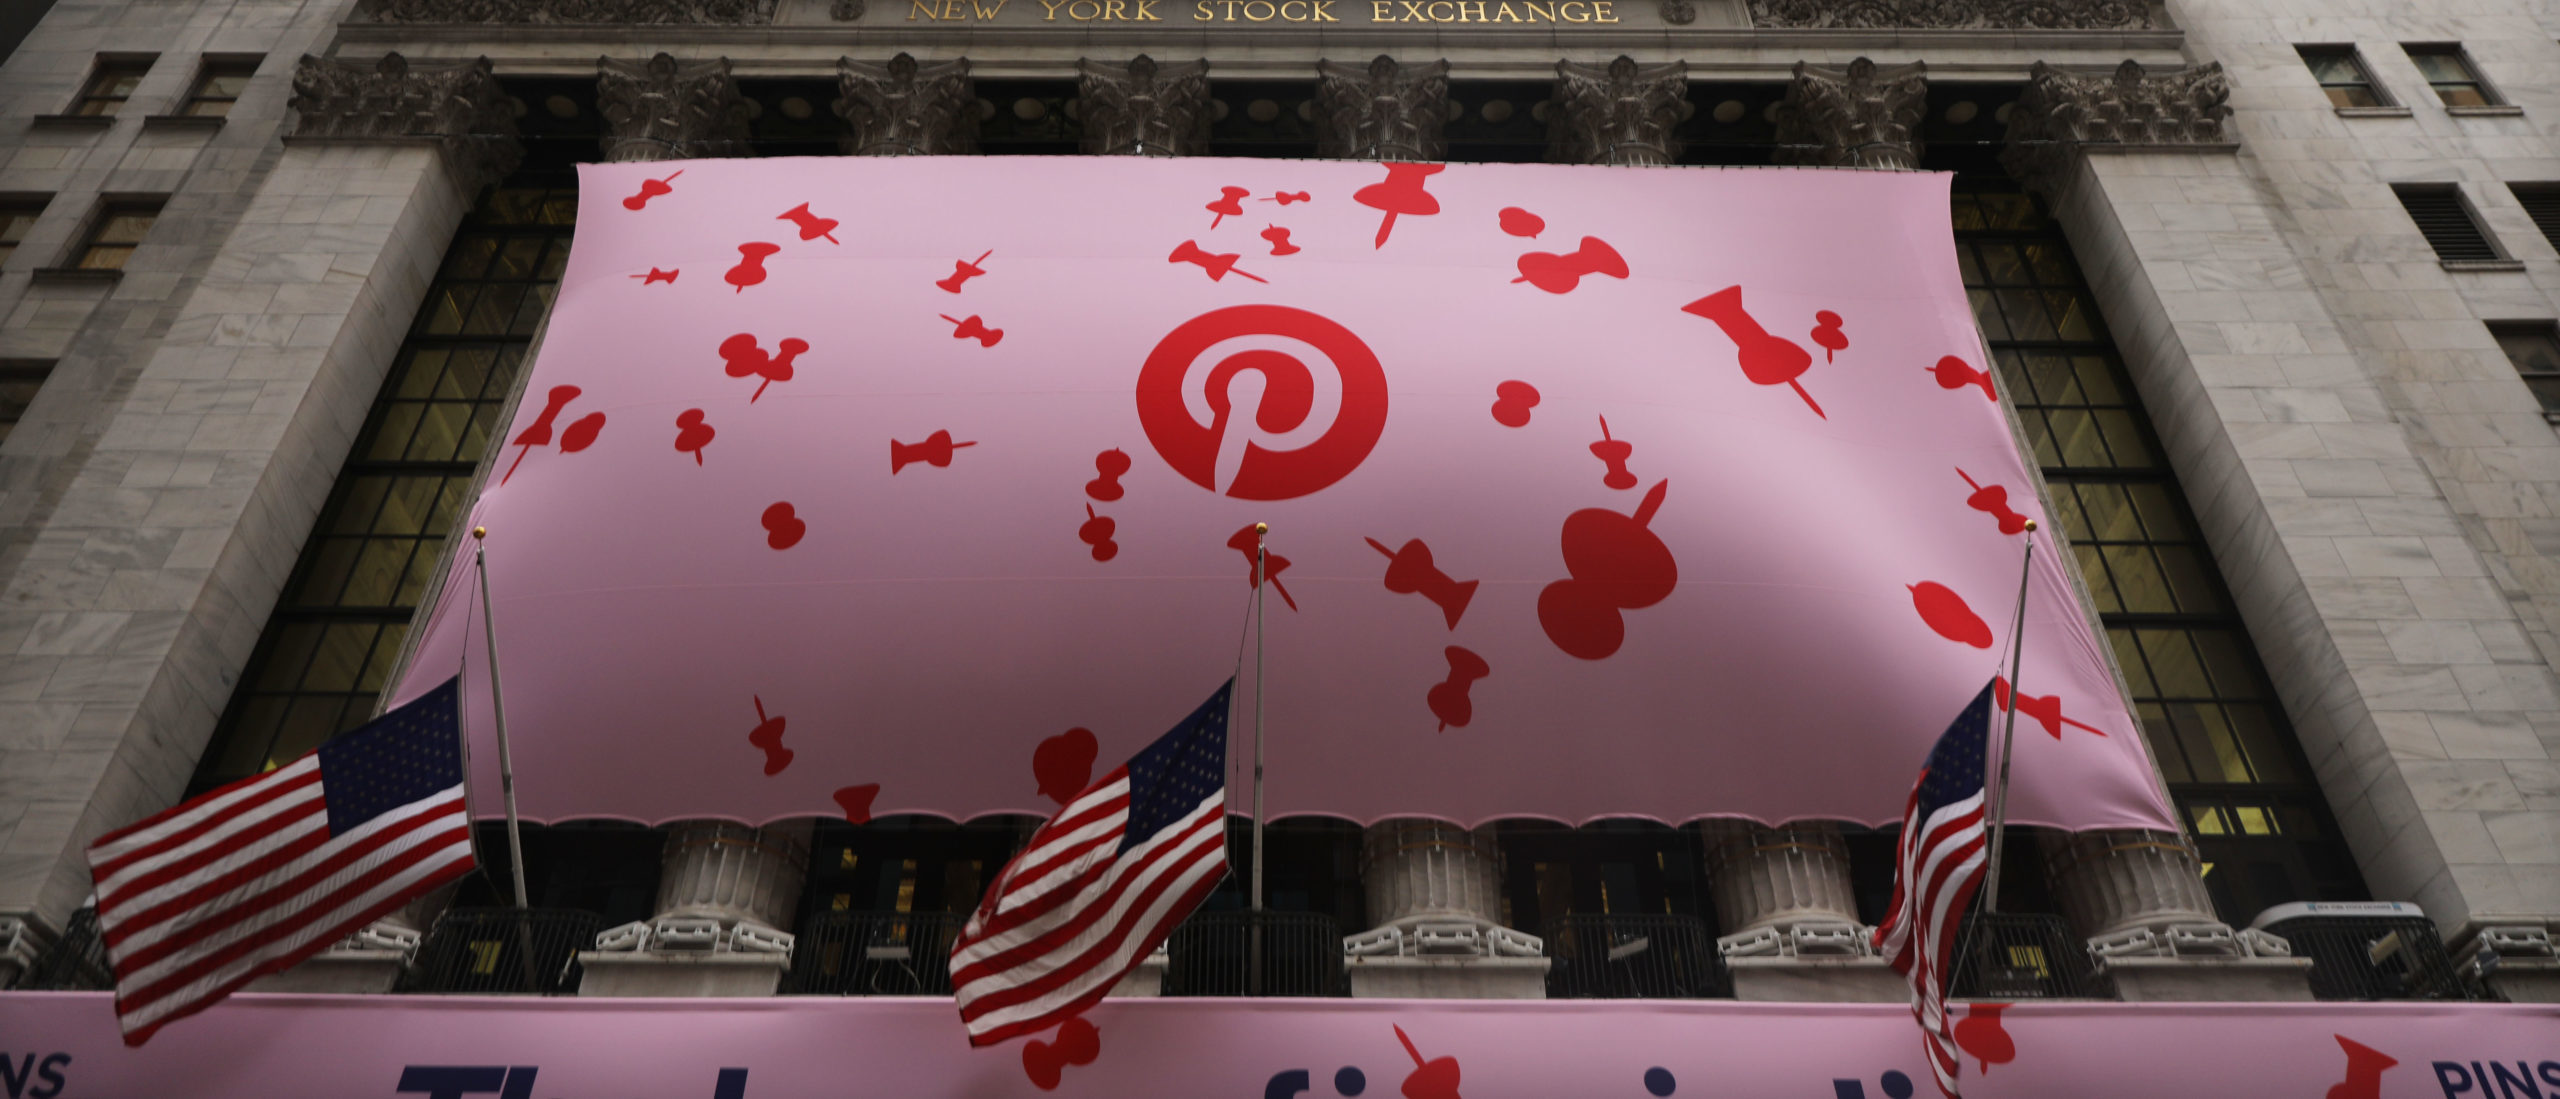 Pinterest Agrees To Pay 225 Million To Settle Gender Discrimination Lawsuit The Daily Caller 0638